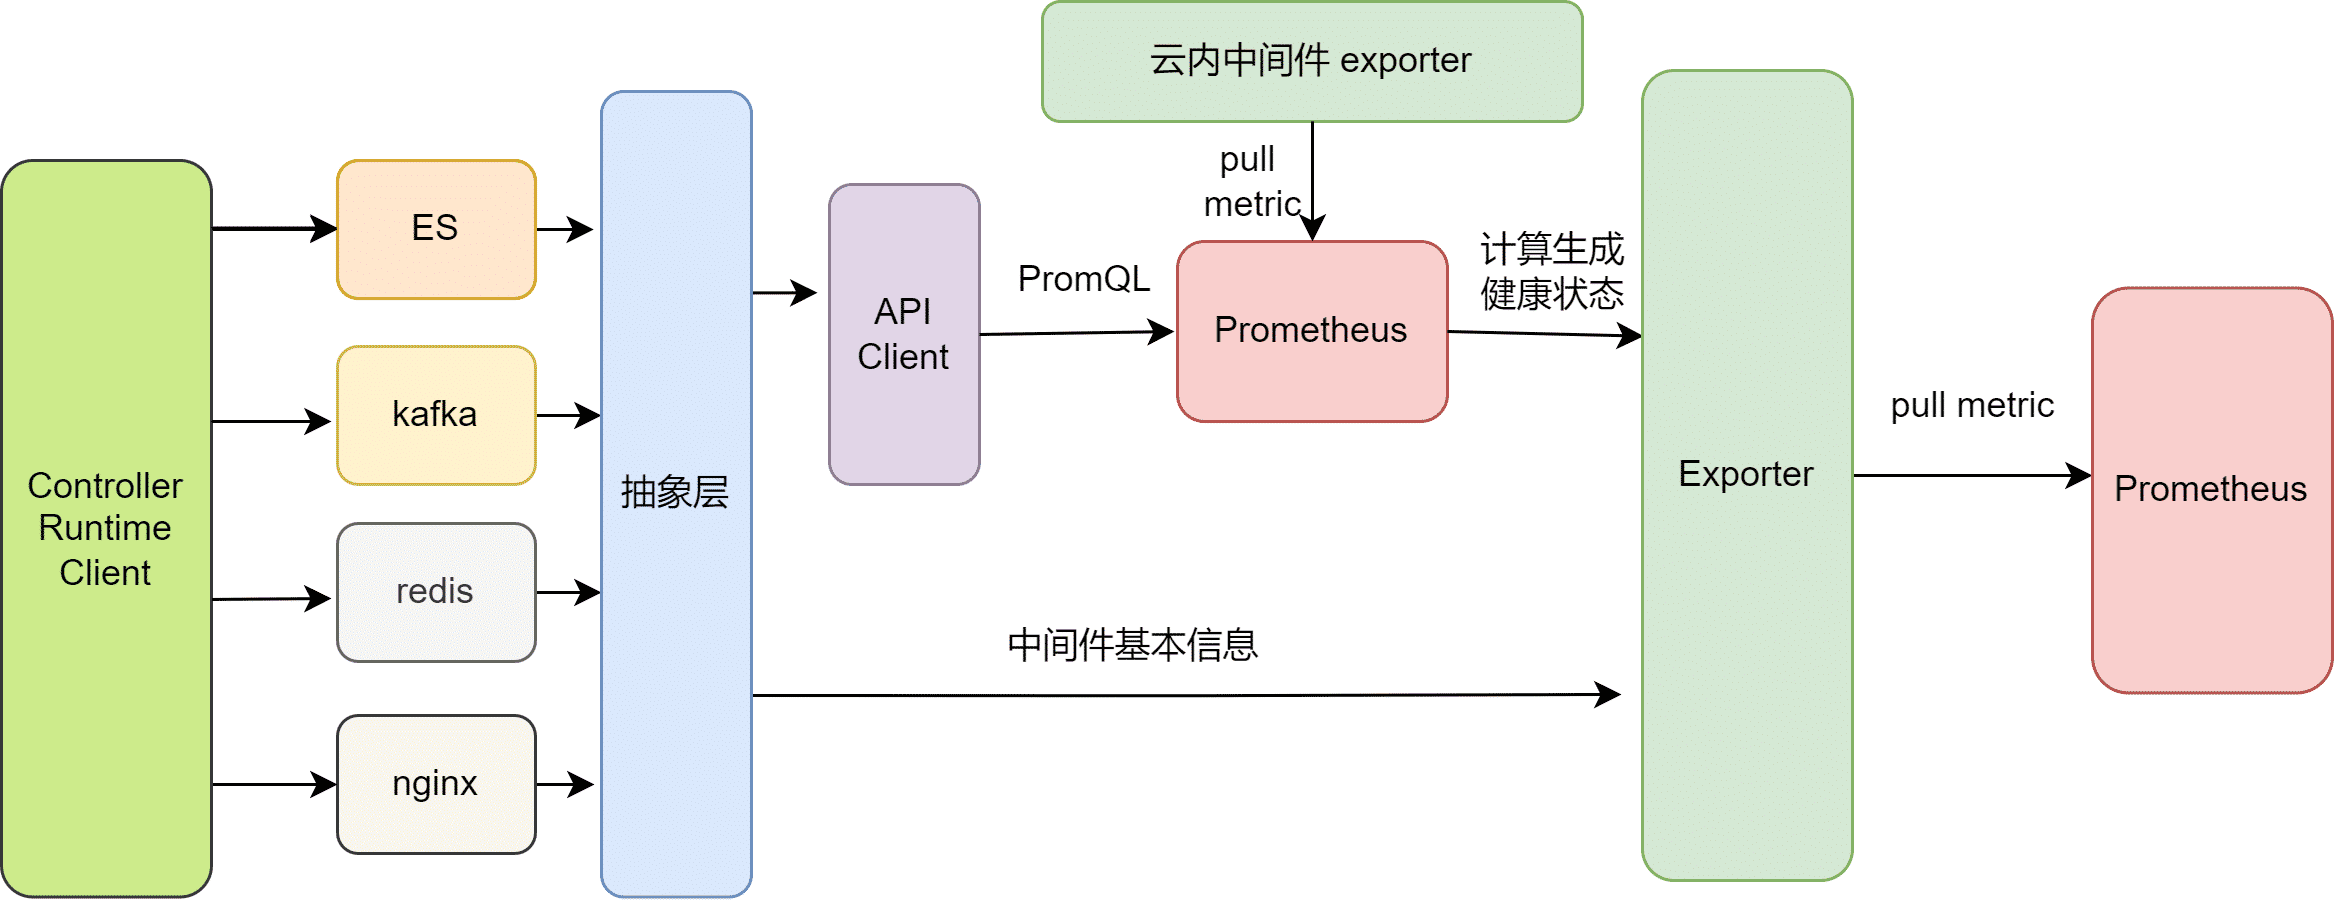 paas-exporter_drawio.png